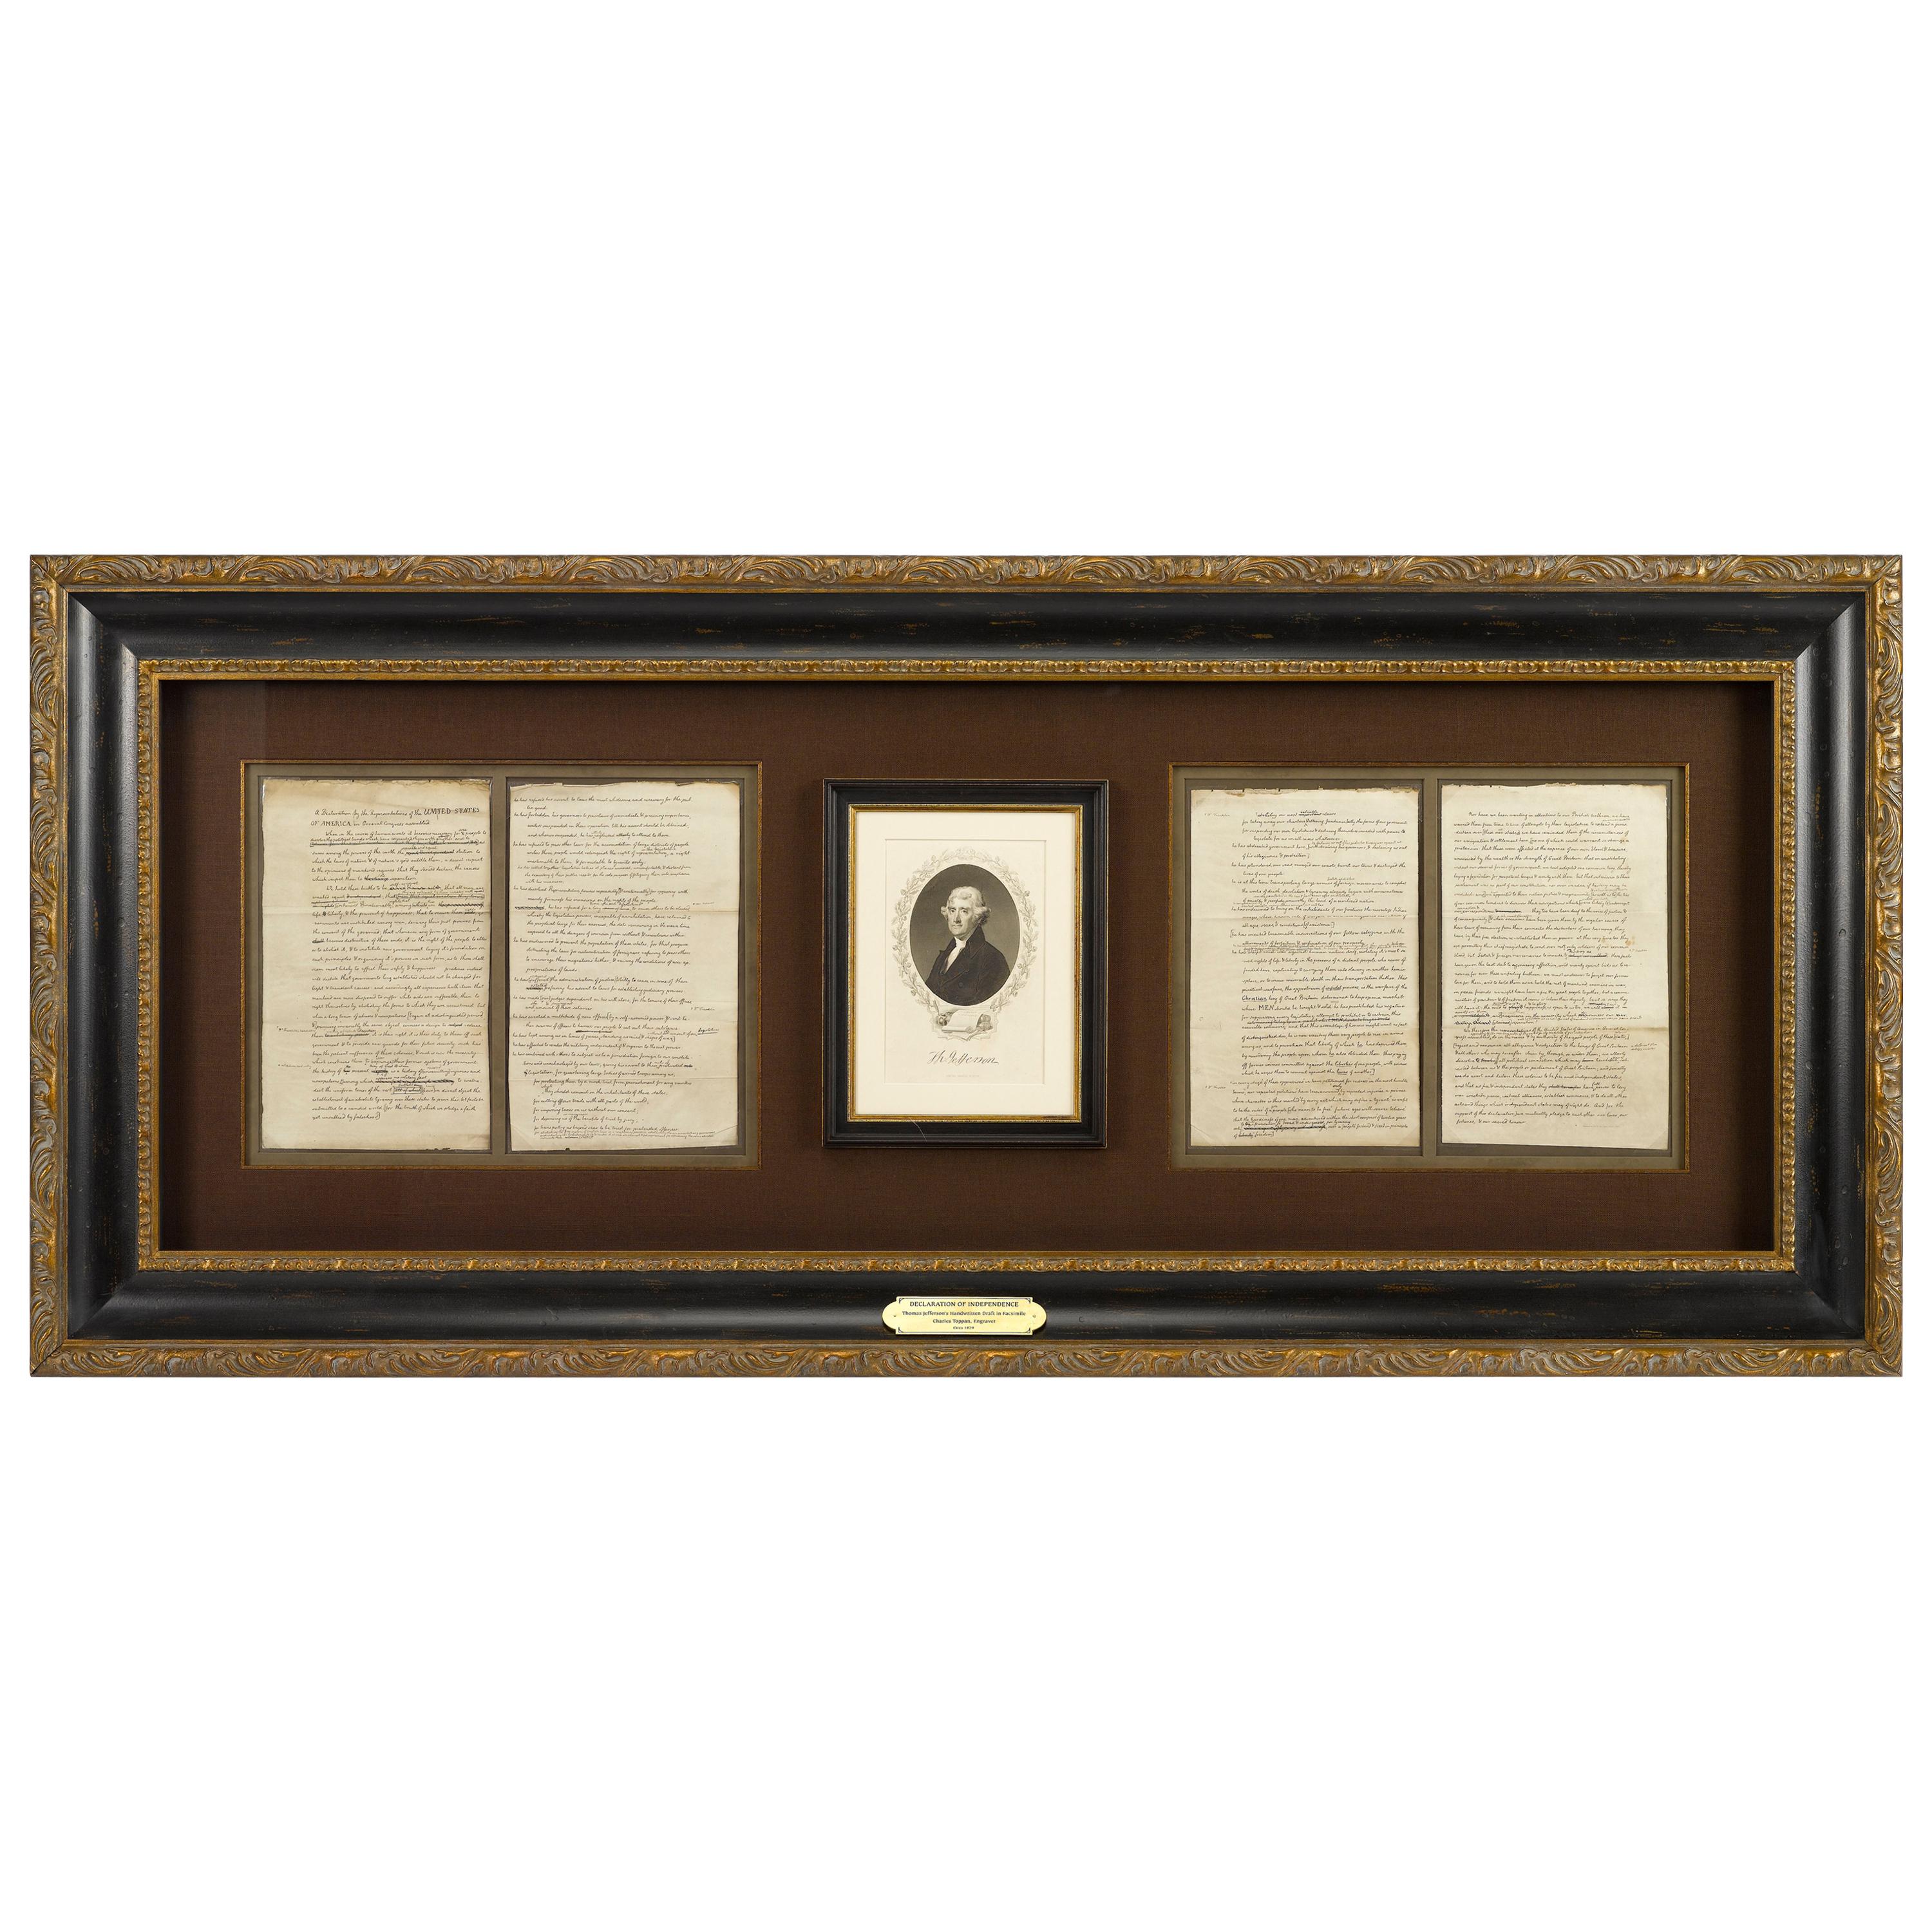 1829 Declaration of Independence Draft by Thomas Jefferson, Antique Engraving